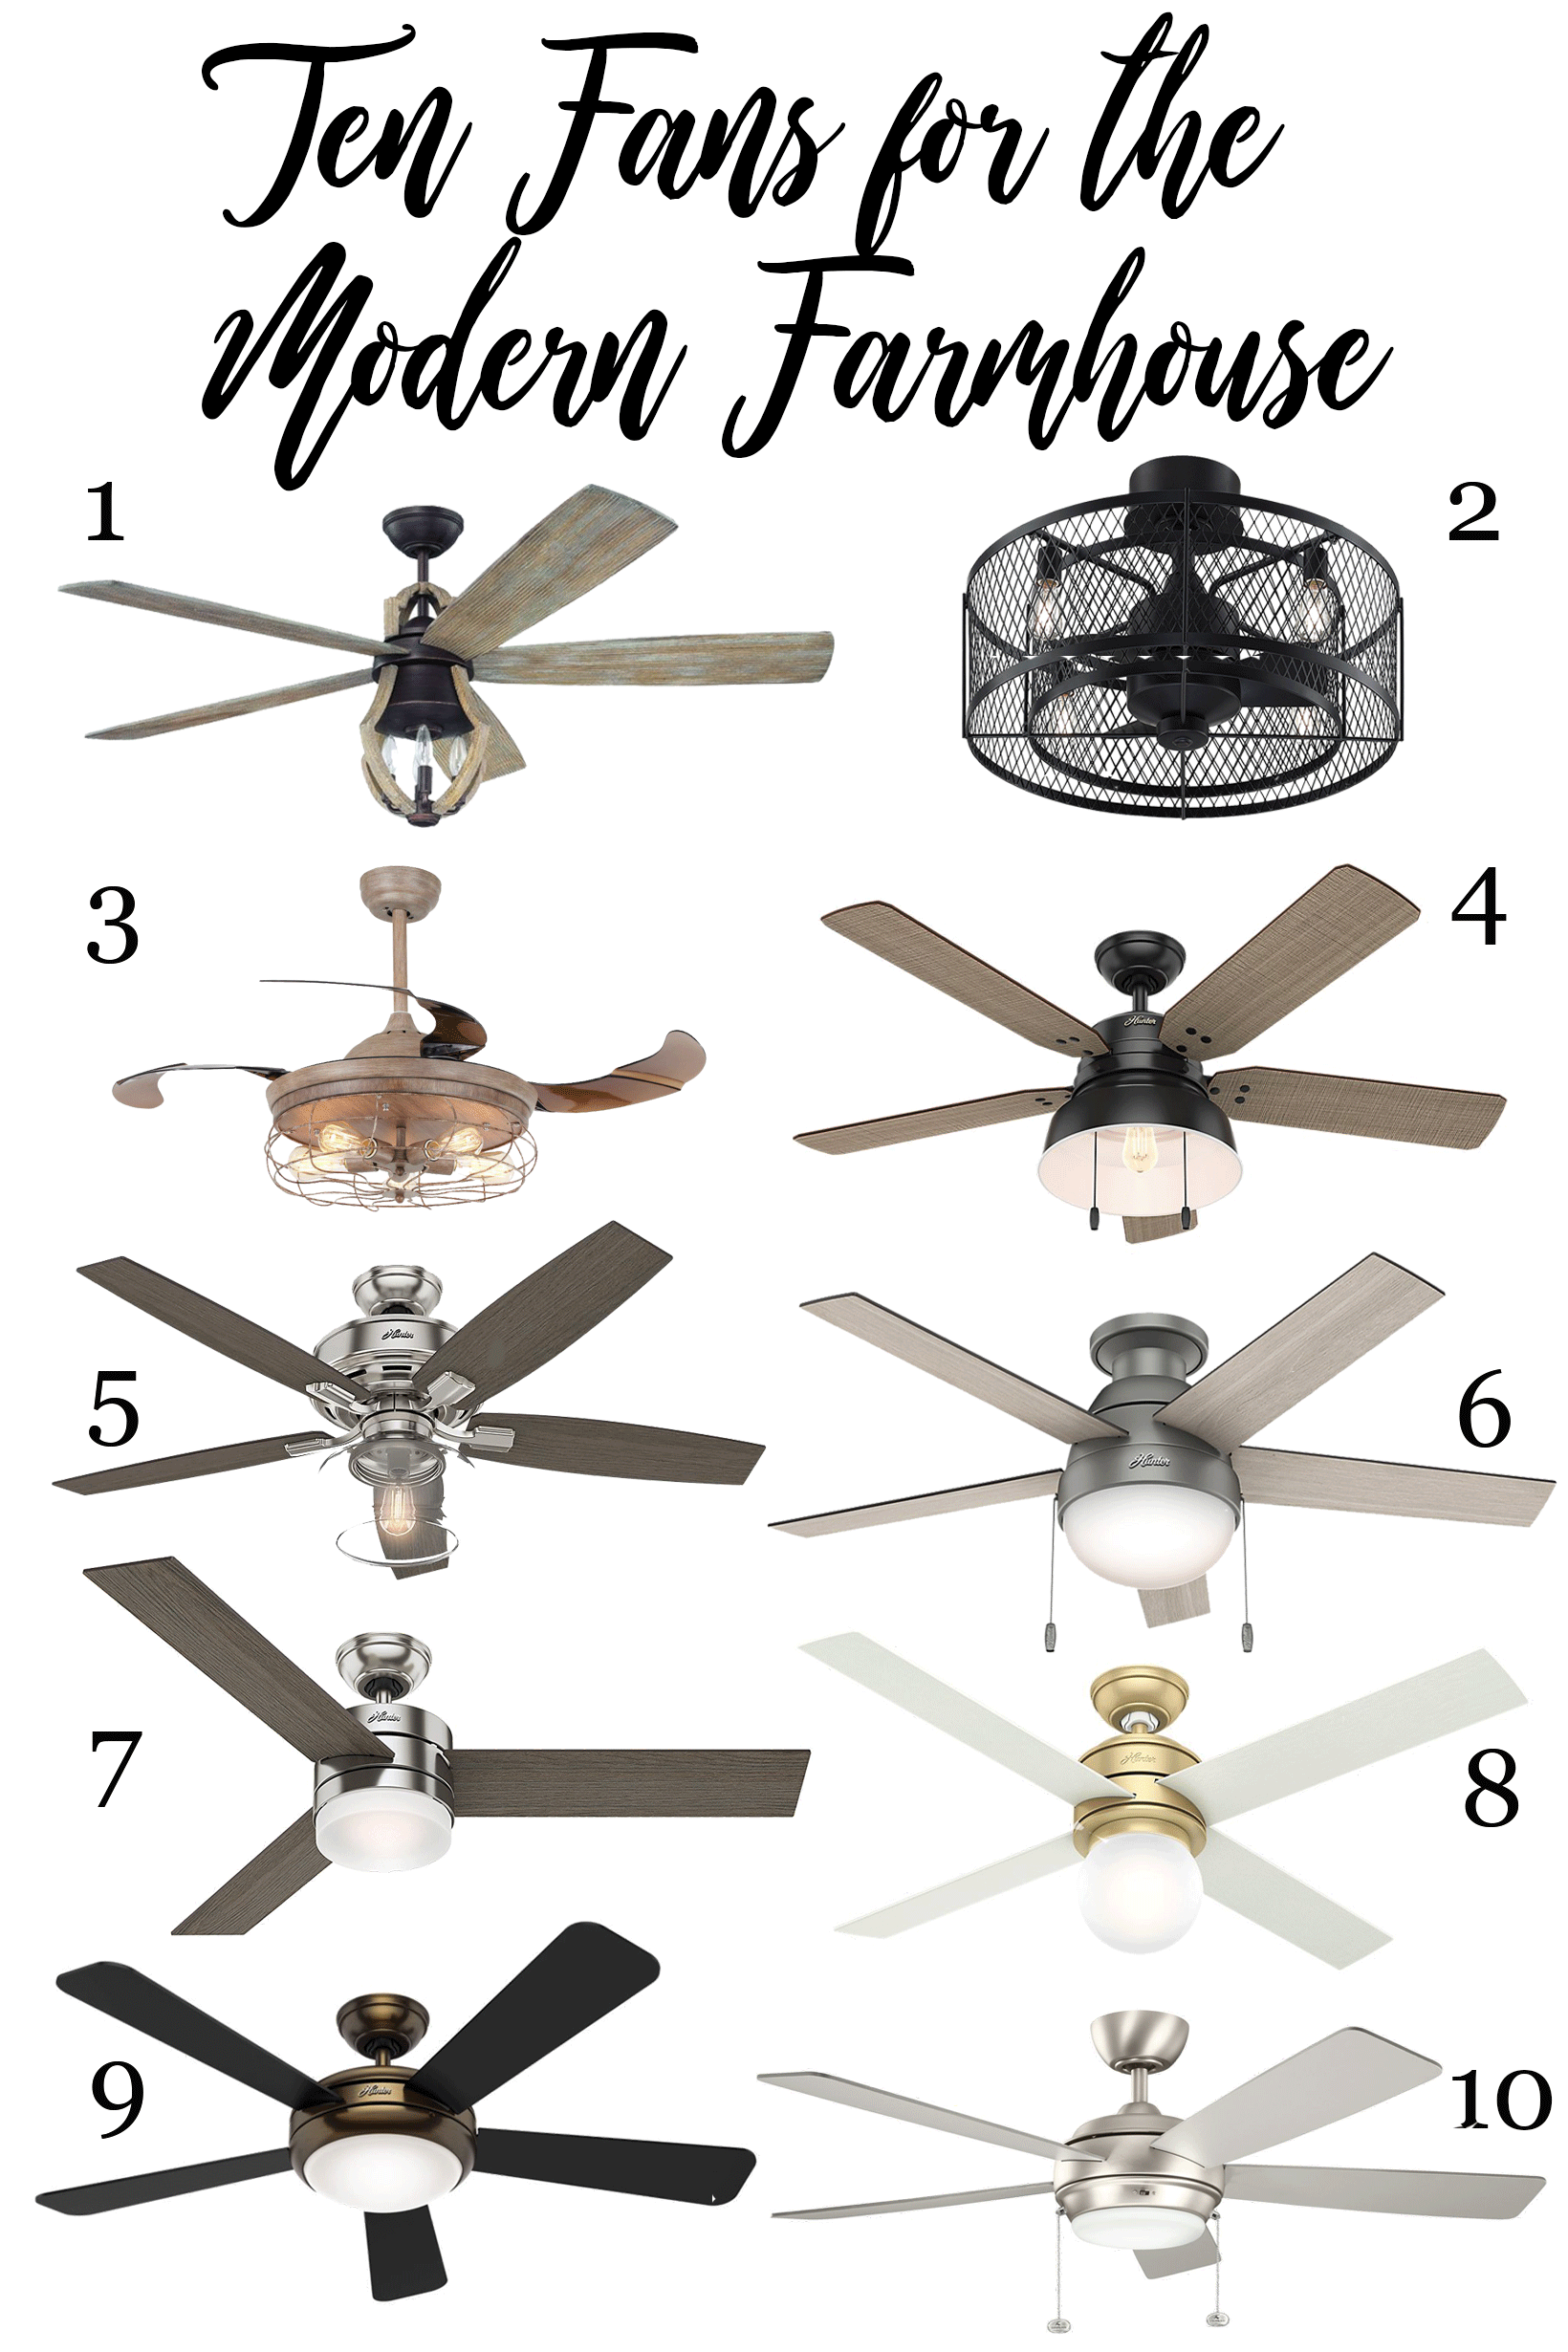 Ten Fans for the Modern Style Farmhouse | While I’m not a fan of how typical cei…